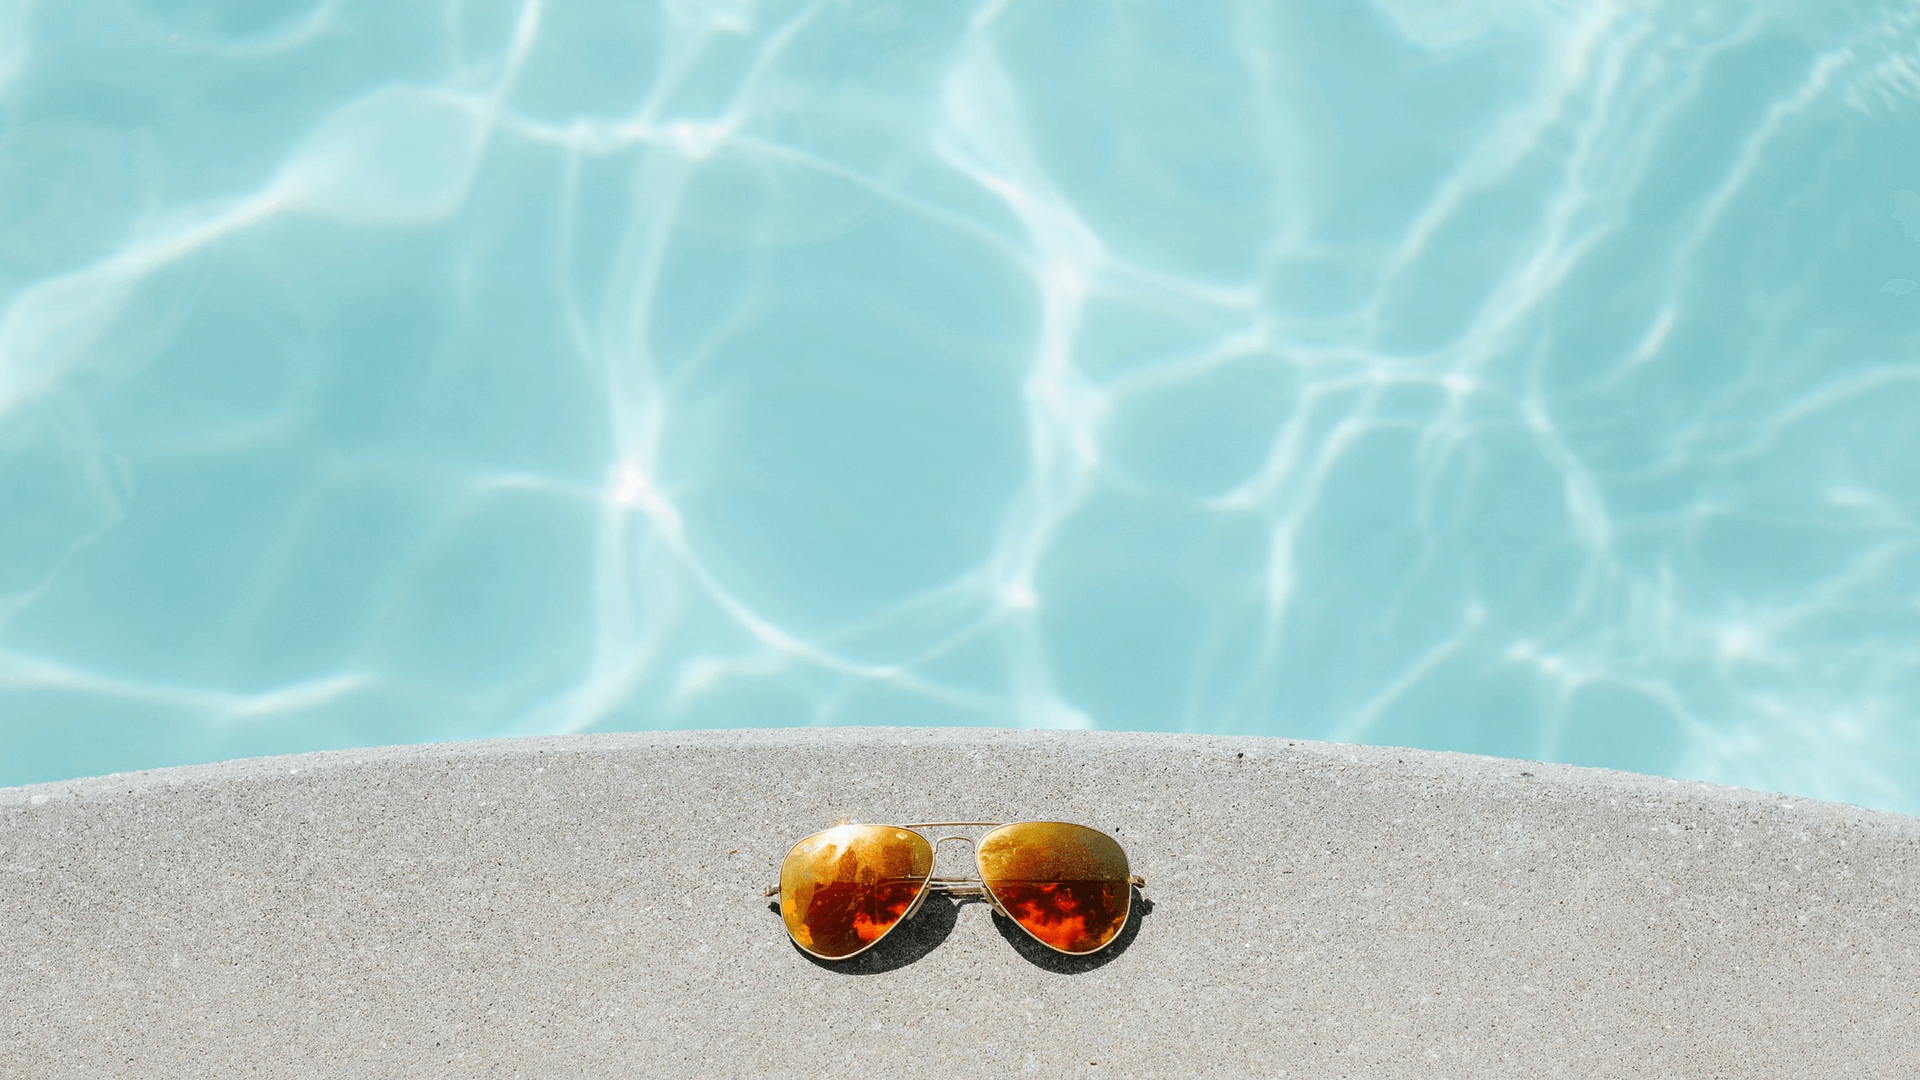 This image displays a pool and sun glasses and portrays relevance to branding and strategic communications for nonprofit fundraising